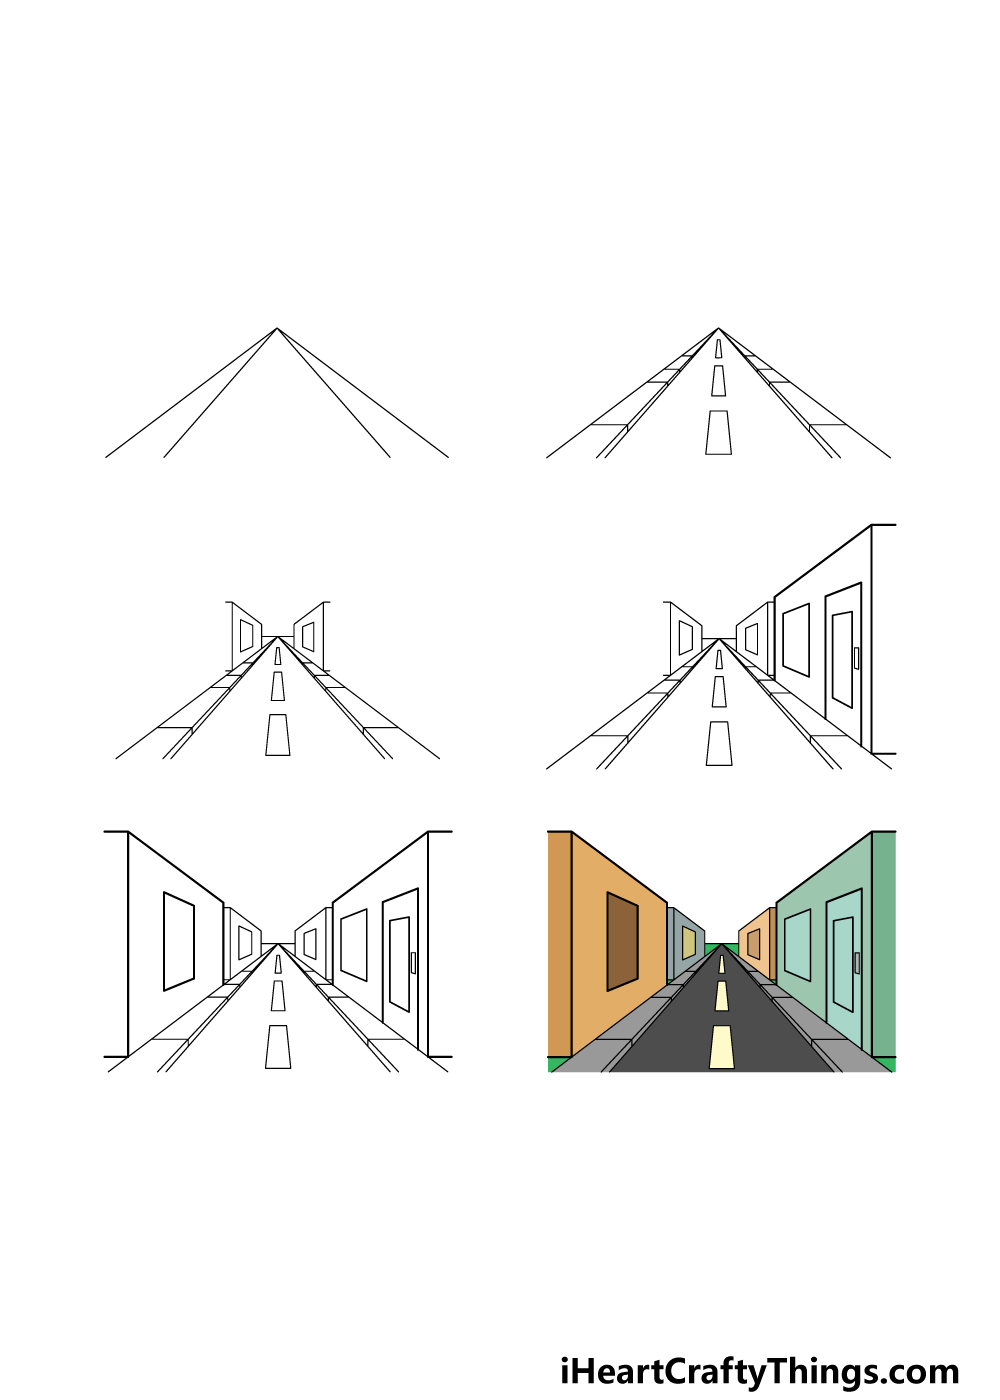 How to Draw One-Point Perspective - A Step by Step Guide